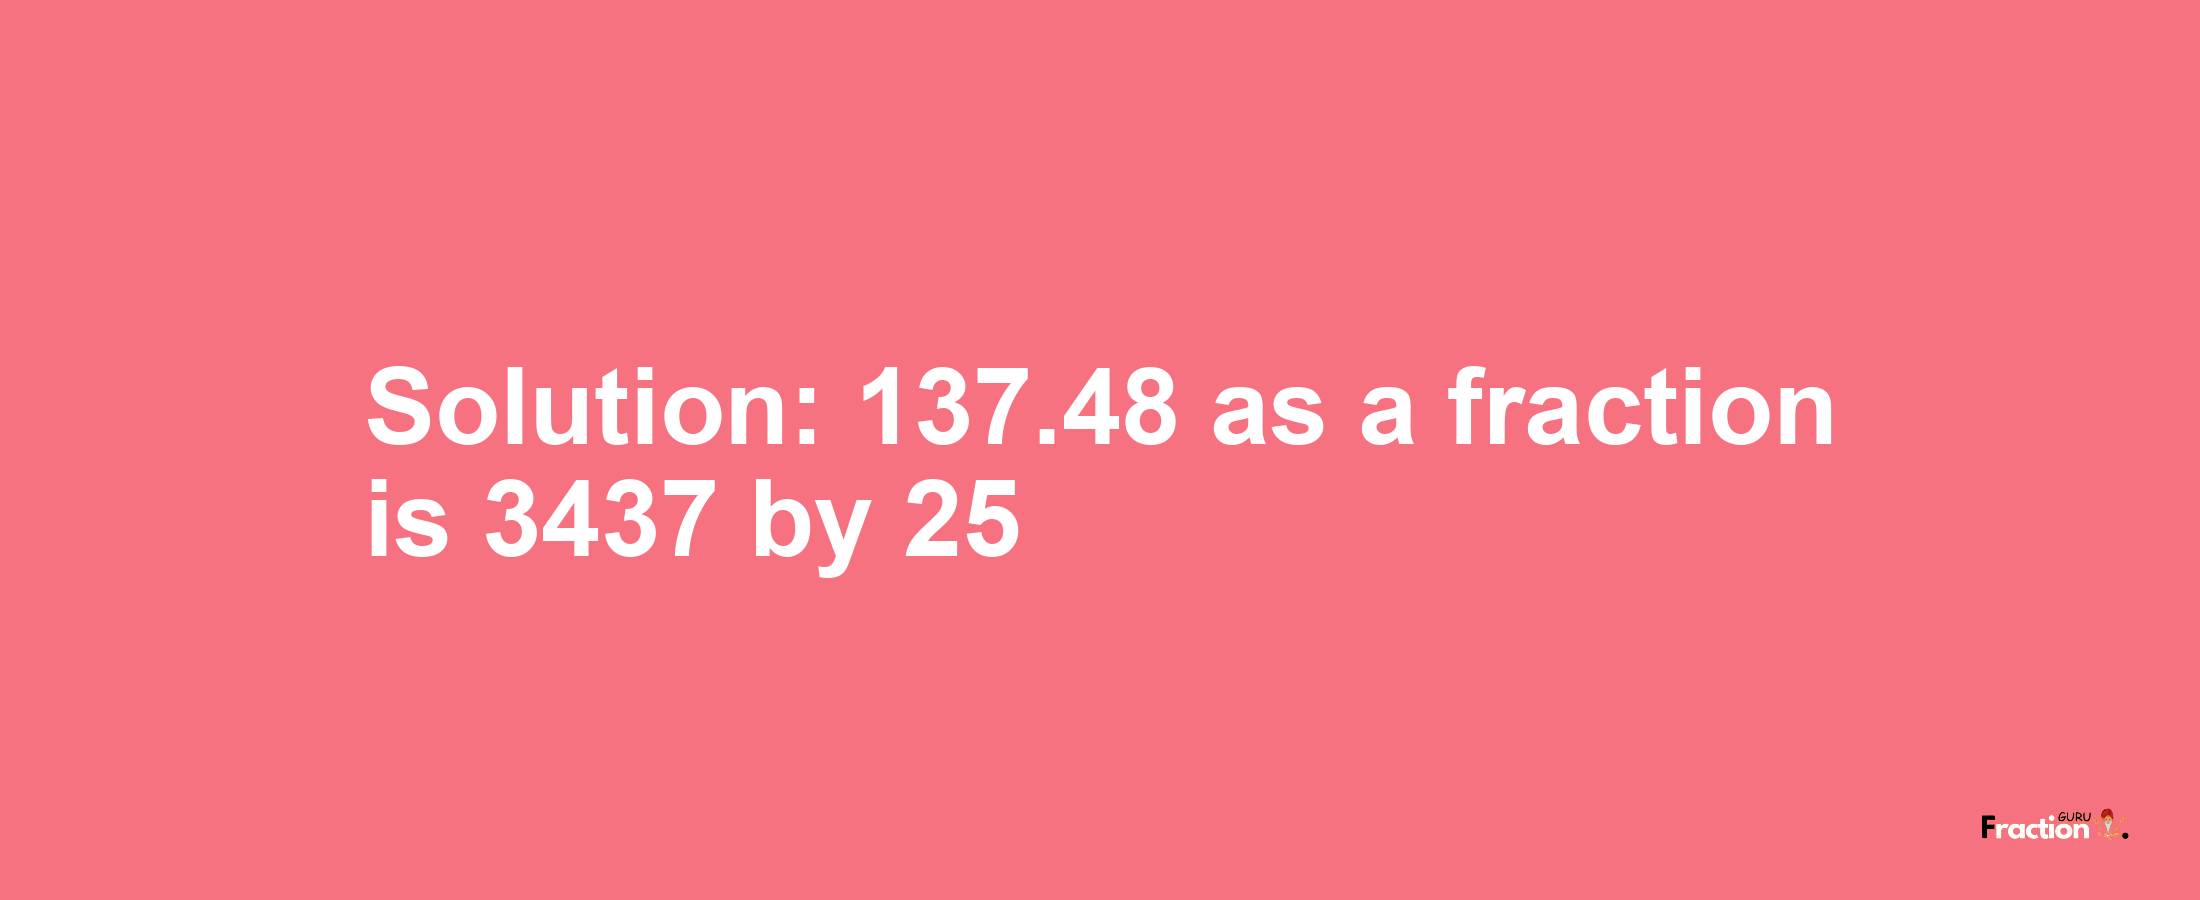 Solution:137.48 as a fraction is 3437/25